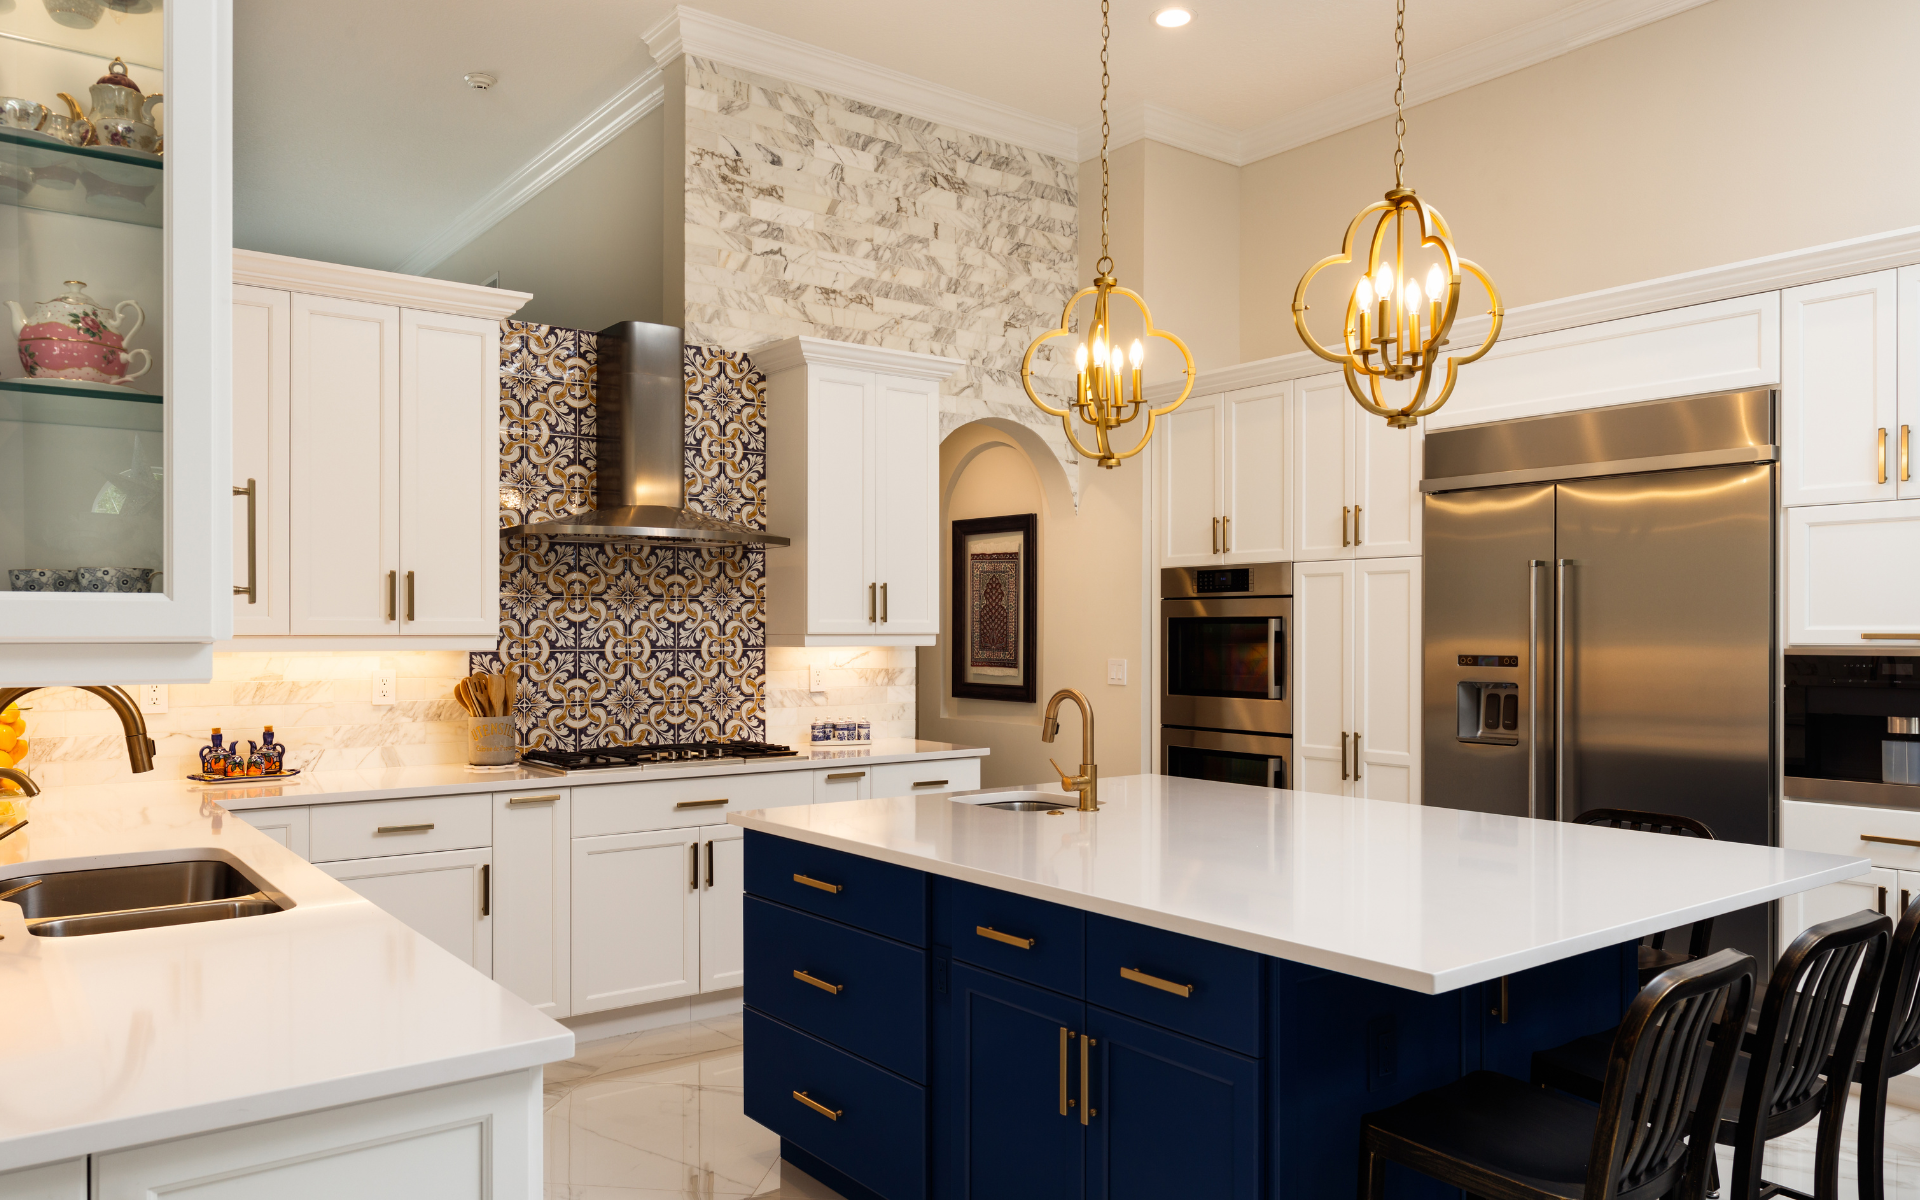 Elegant kitchen with white and blue cabinets